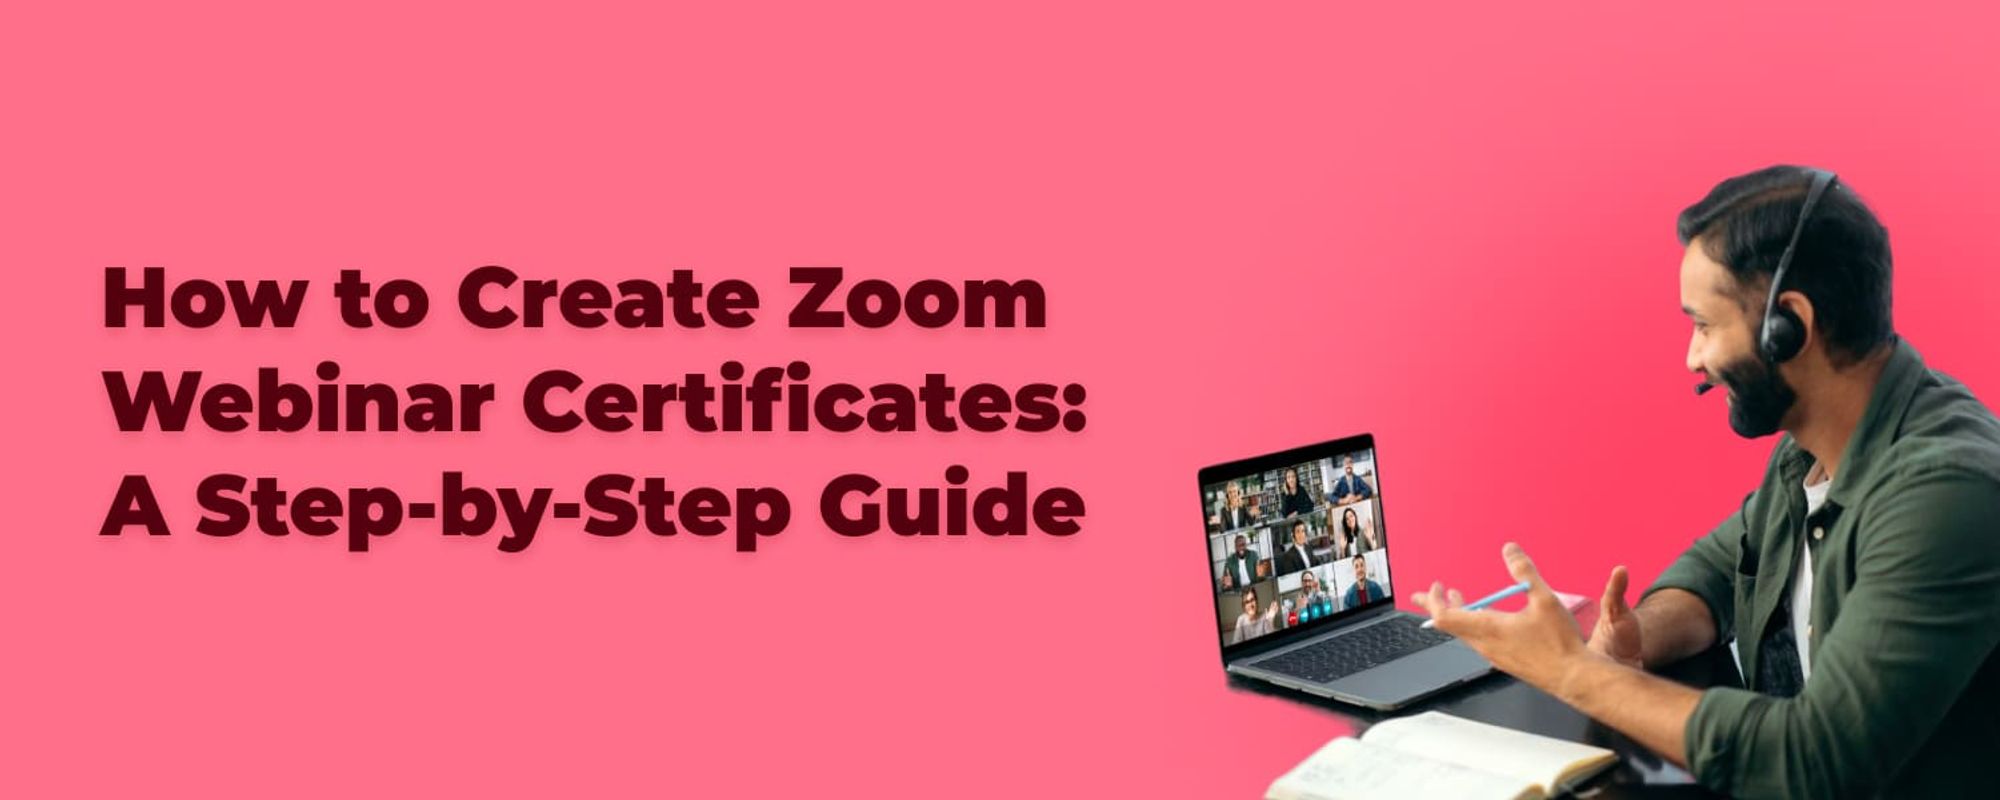 How to Create Zoom Webinar Certificates: A Step-by-Step Guide